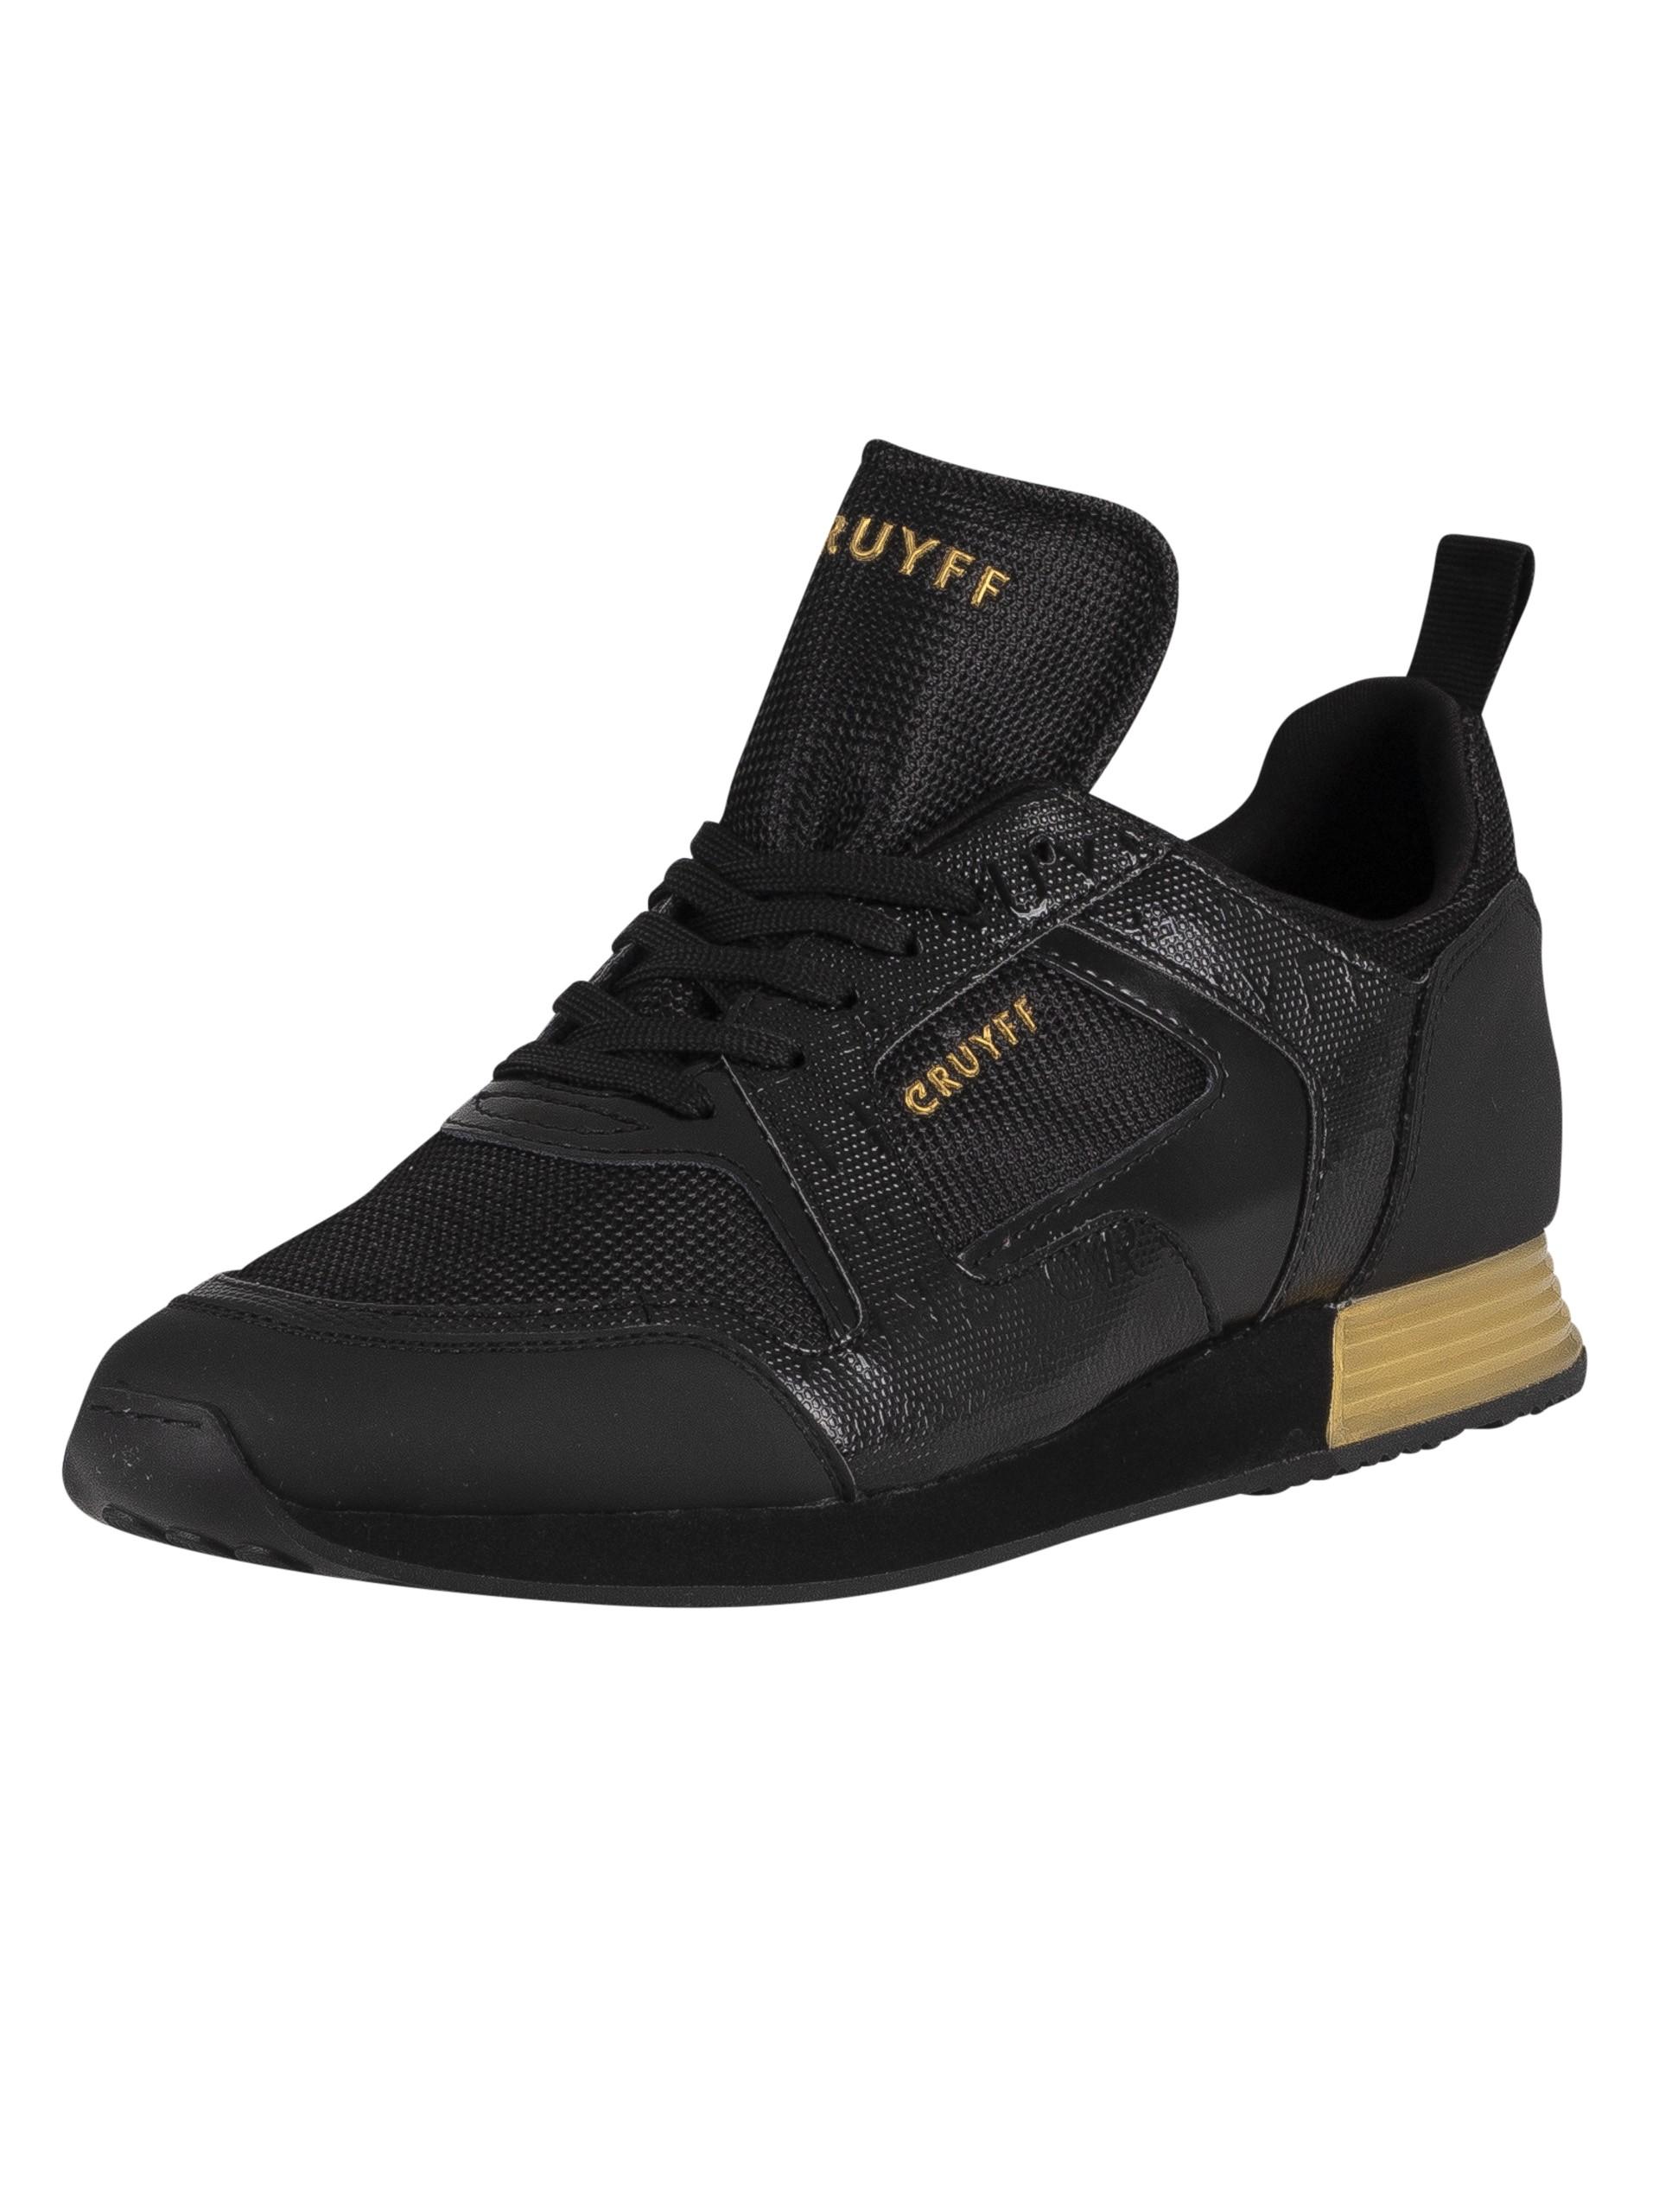 Cruyff Lusso Leather Trainers in Black for Men - Lyst